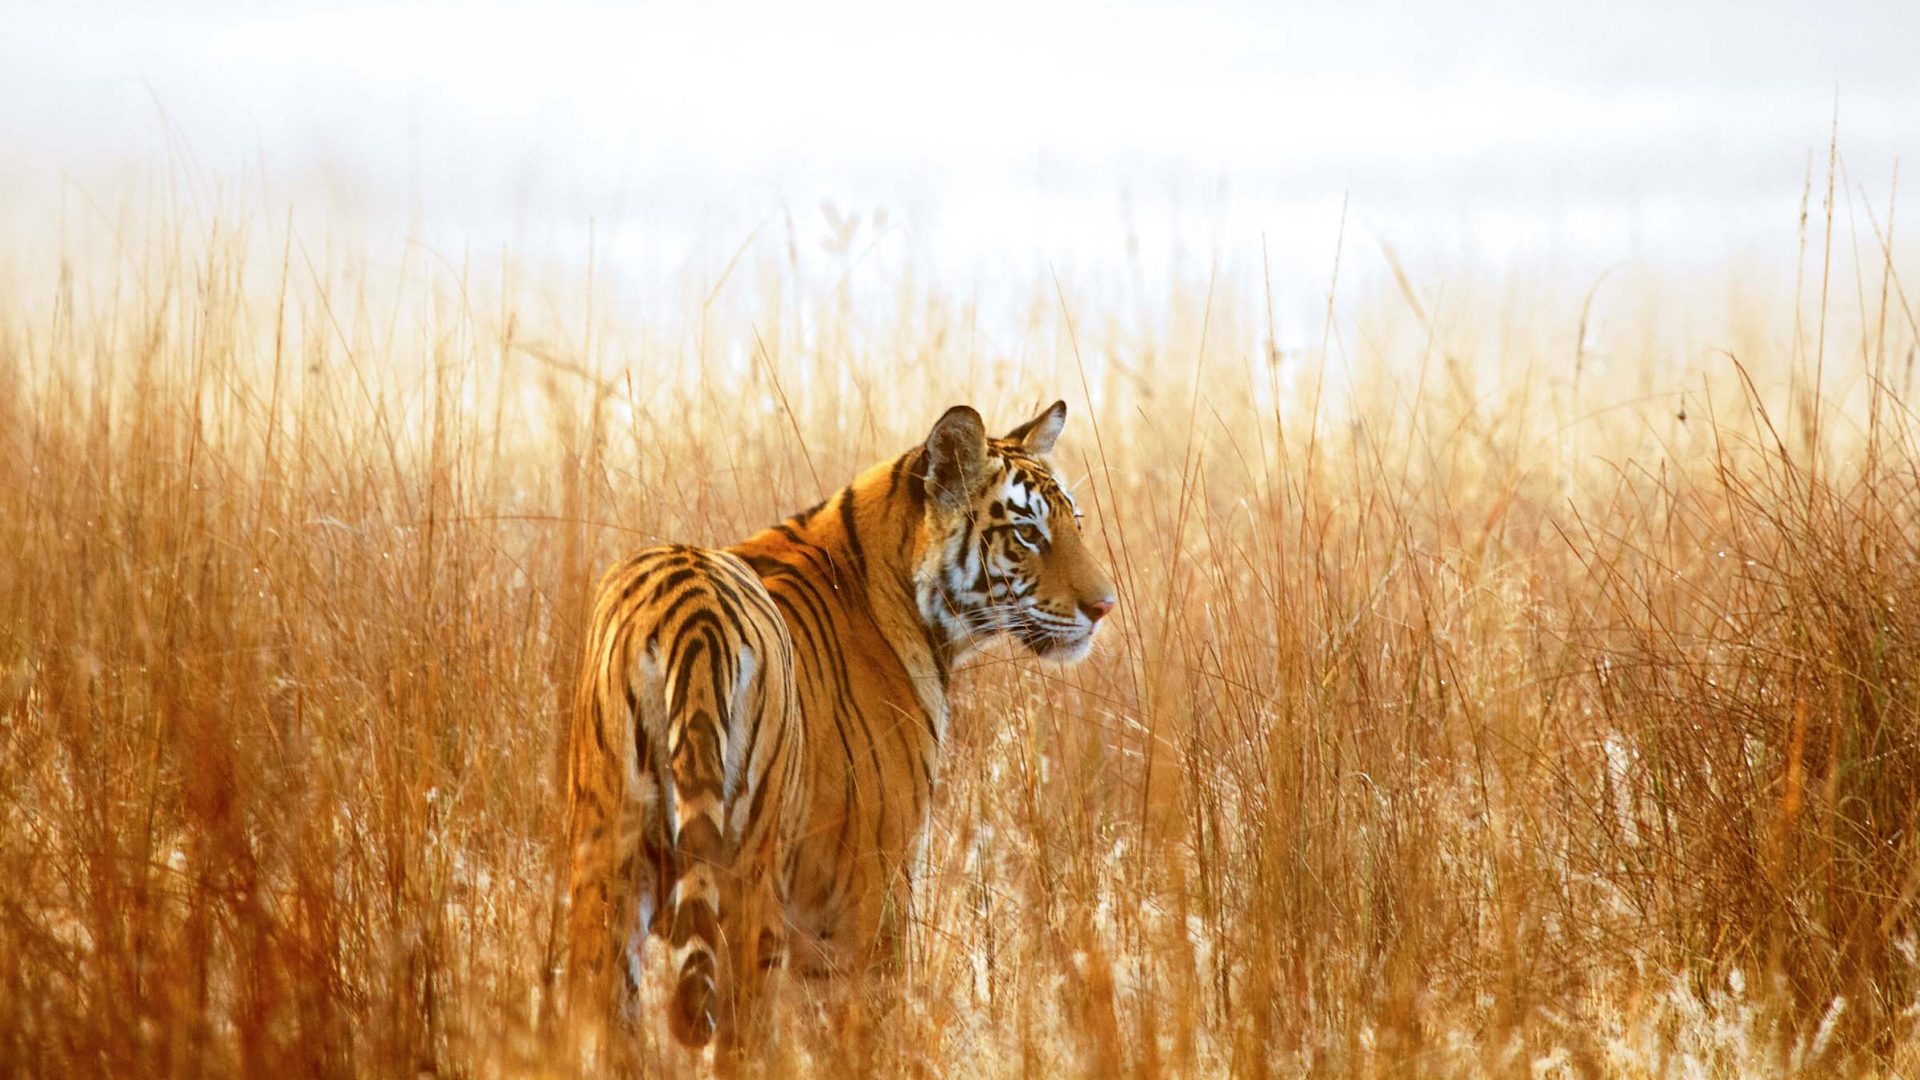 Roaring back to life: Nepal has doubled its tiger population—but at what price?